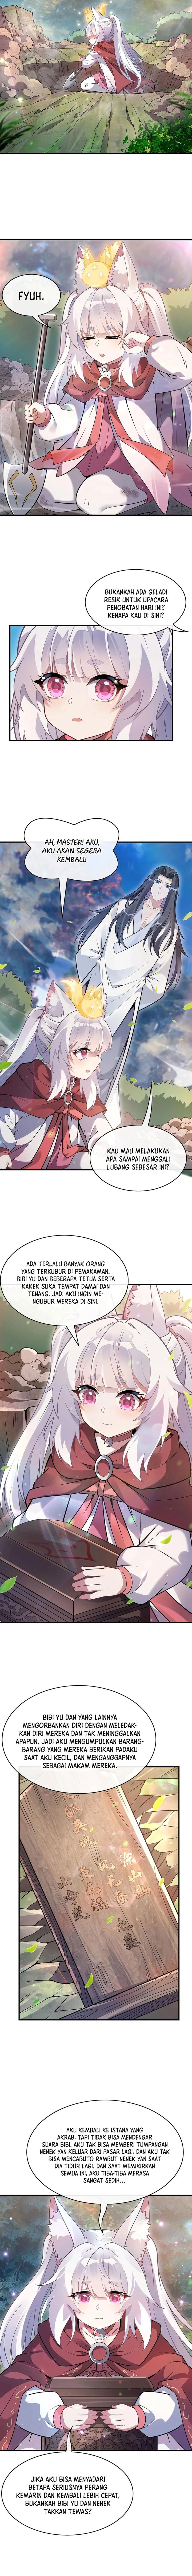 Dilarang COPAS - situs resmi www.mangacanblog.com - Komik my female apprentices are all big shots from the future 250 - chapter 250 251 Indonesia my female apprentices are all big shots from the future 250 - chapter 250 Terbaru 6|Baca Manga Komik Indonesia|Mangacan